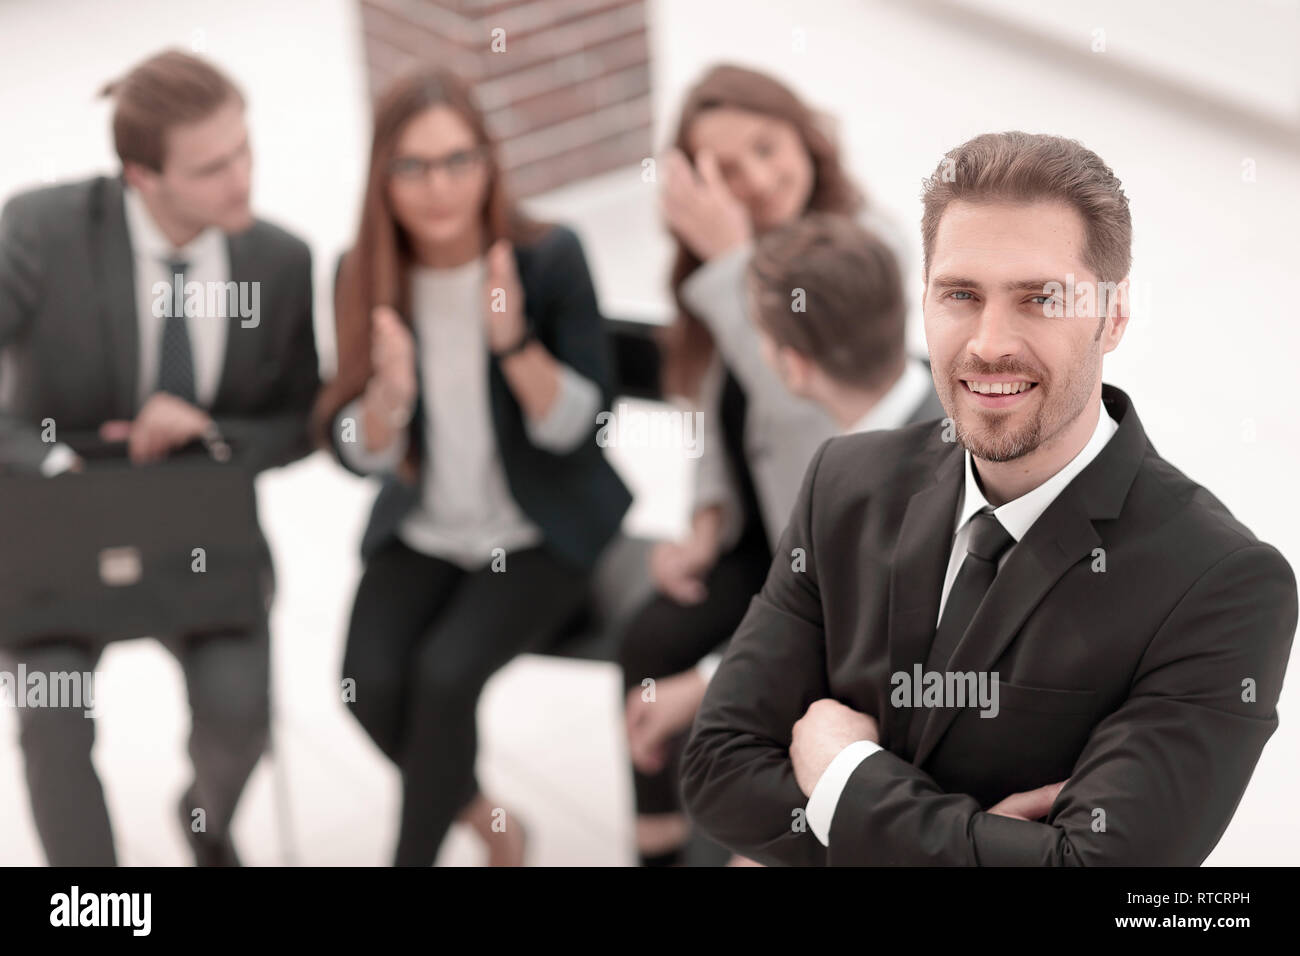 professional portrait of an executive officer Stock Photo